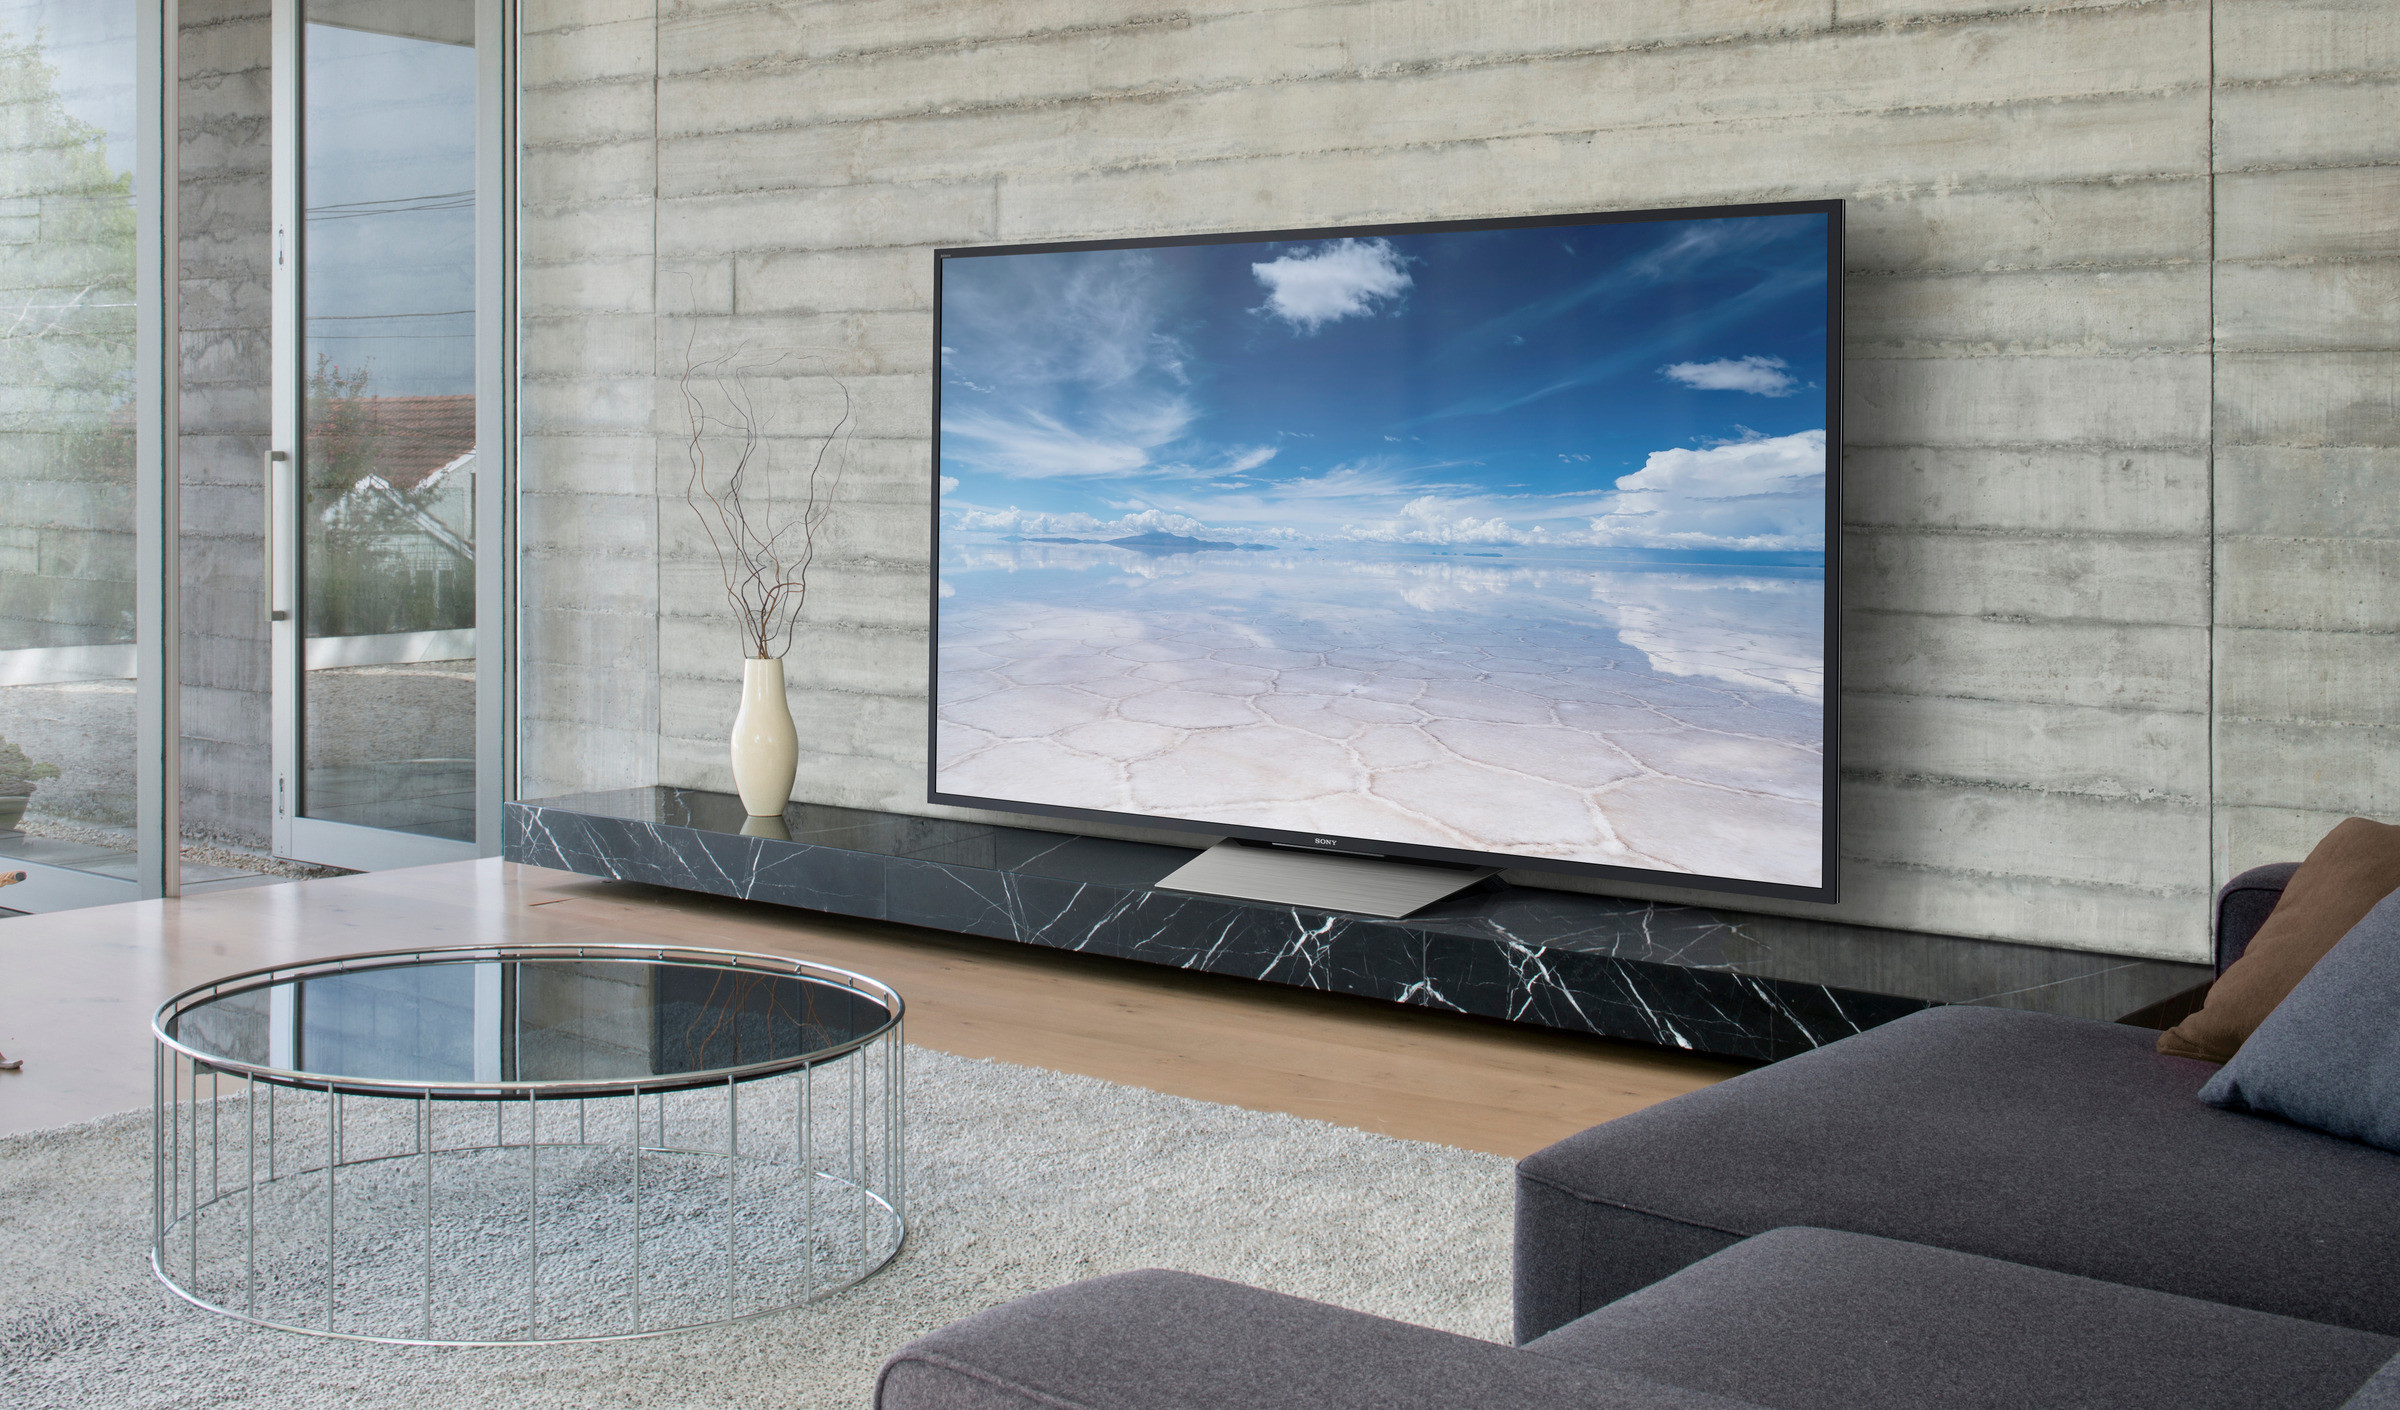 Sony X8500D 4K Bravia TV launched in India